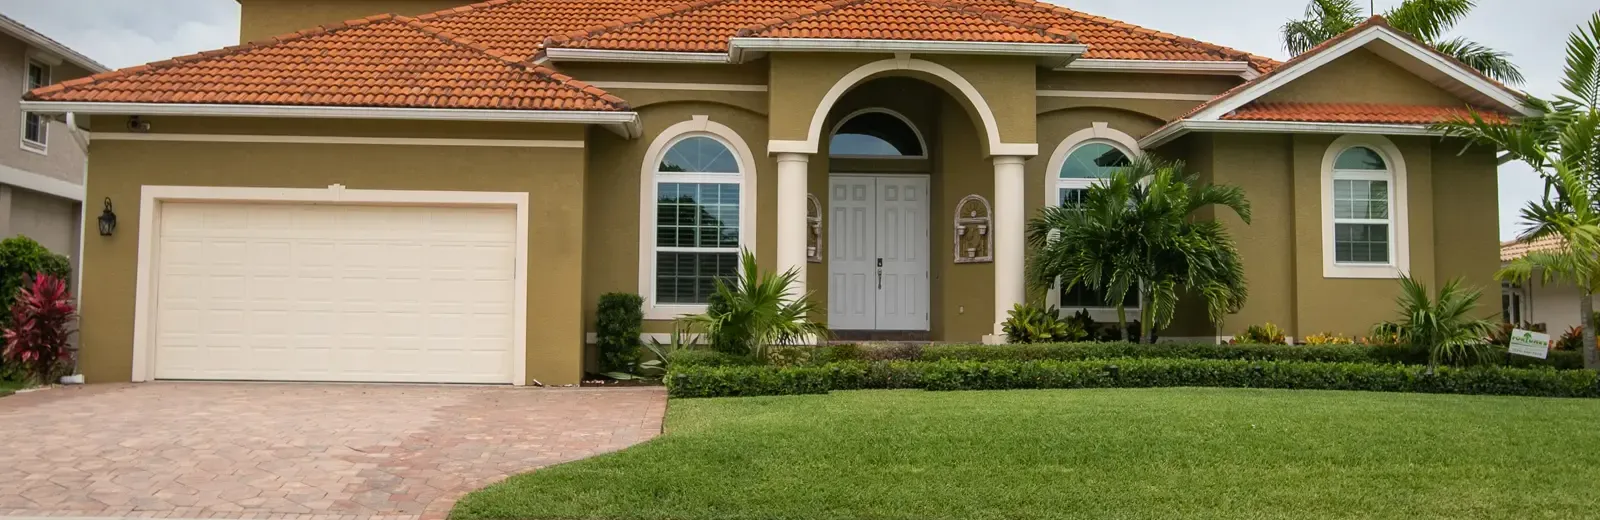 Florida home with nice front yard